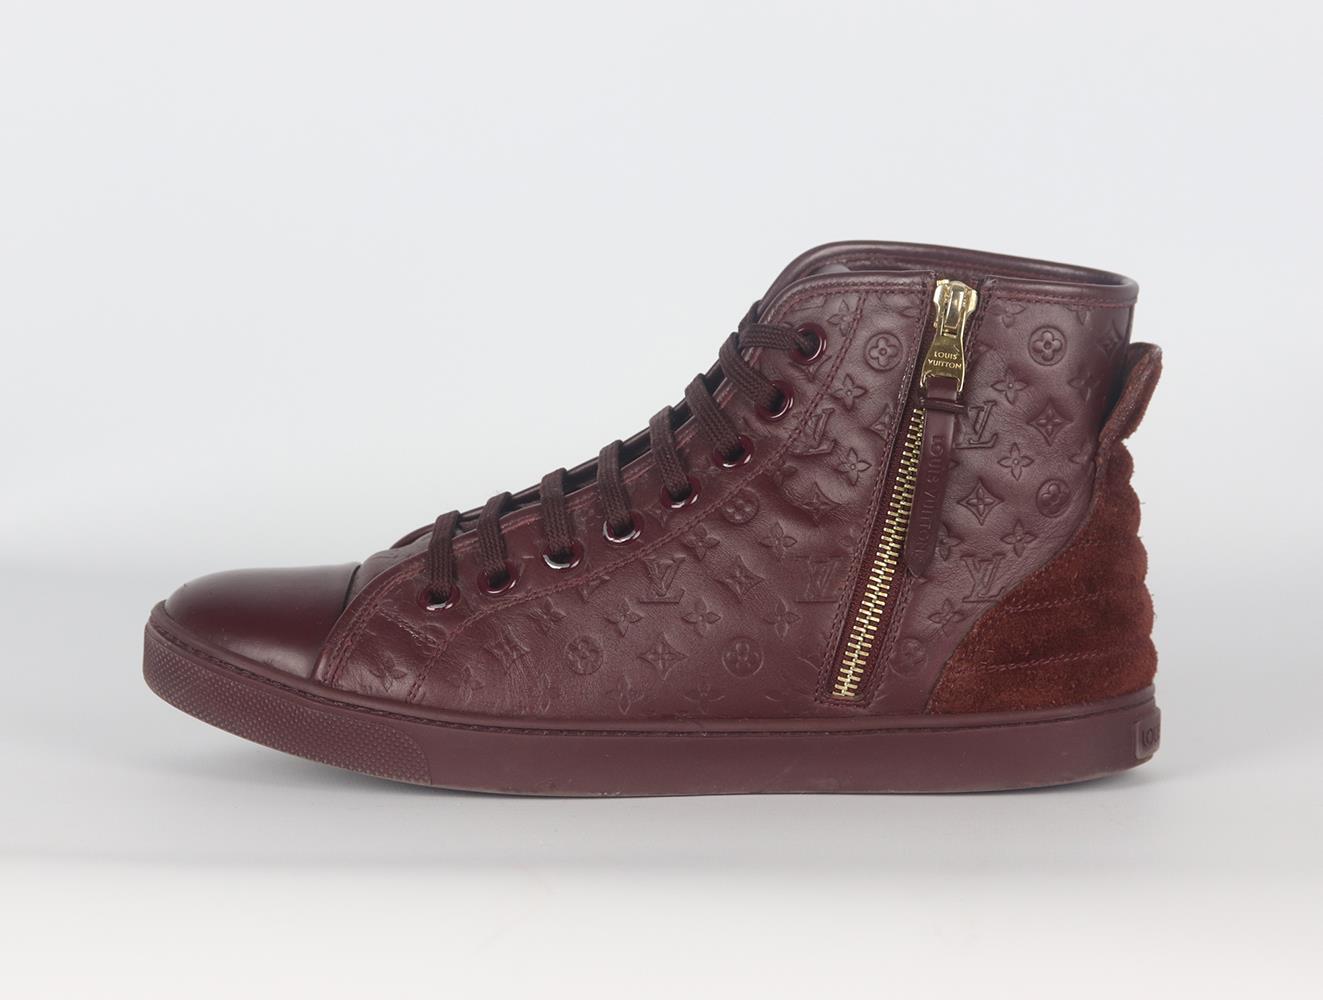 LOUIS VUITTON PUNCHY LOGO EMBOSSED LEATHER AND SUEDE SNEAKERS EU 38 UK 5 US 8